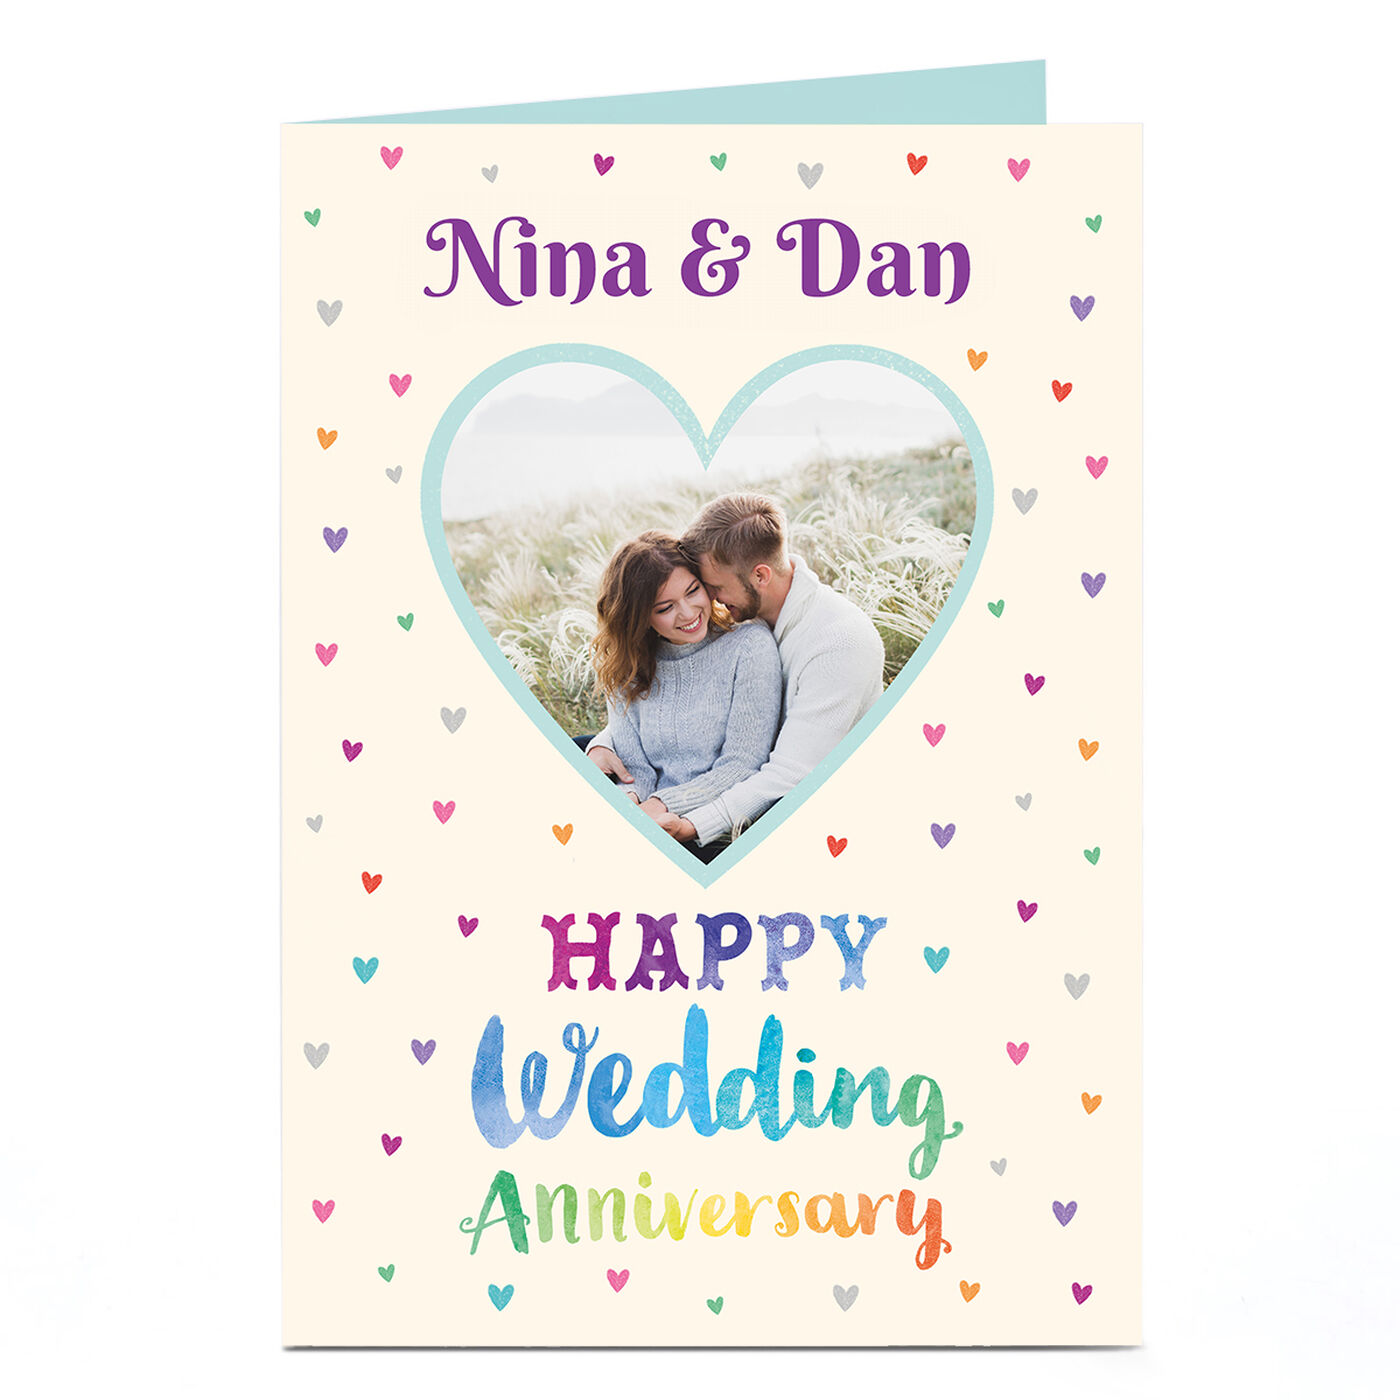 Buy Photo Anniversary Card - Polaroid Scrapbook, Wife for GBP 2.79